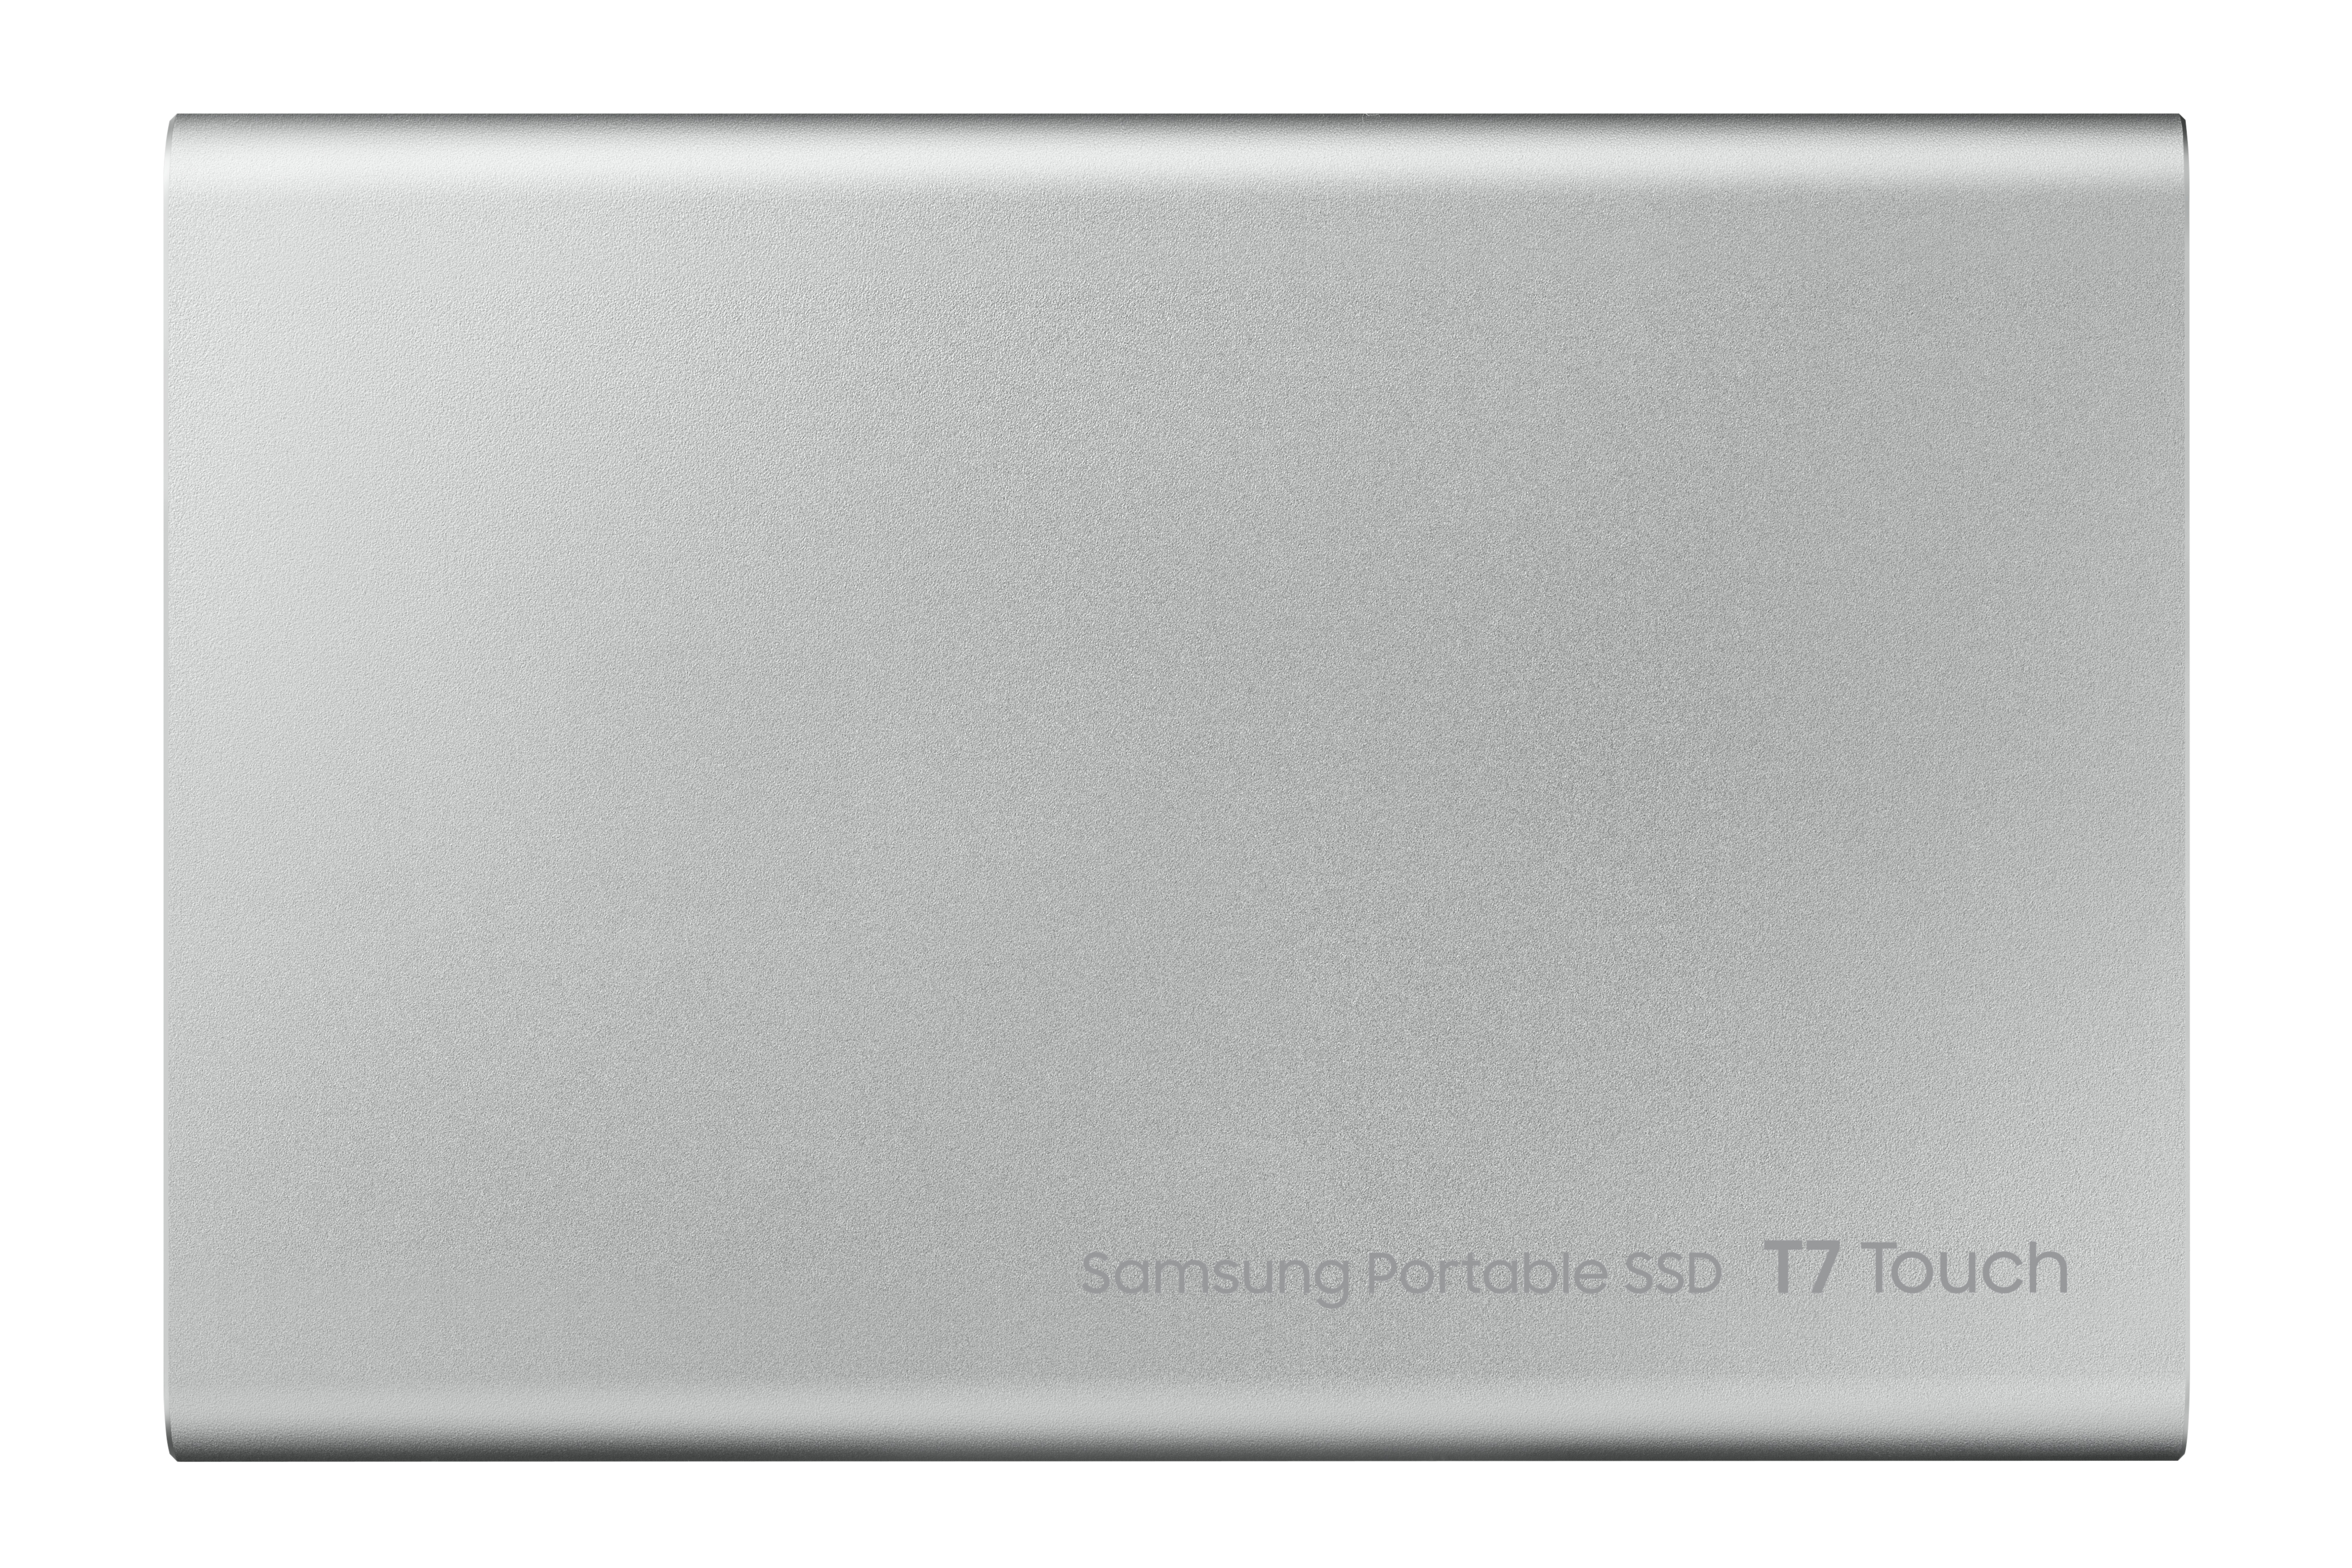 Samsung Portable SSD T7 touch 1 TB Bk